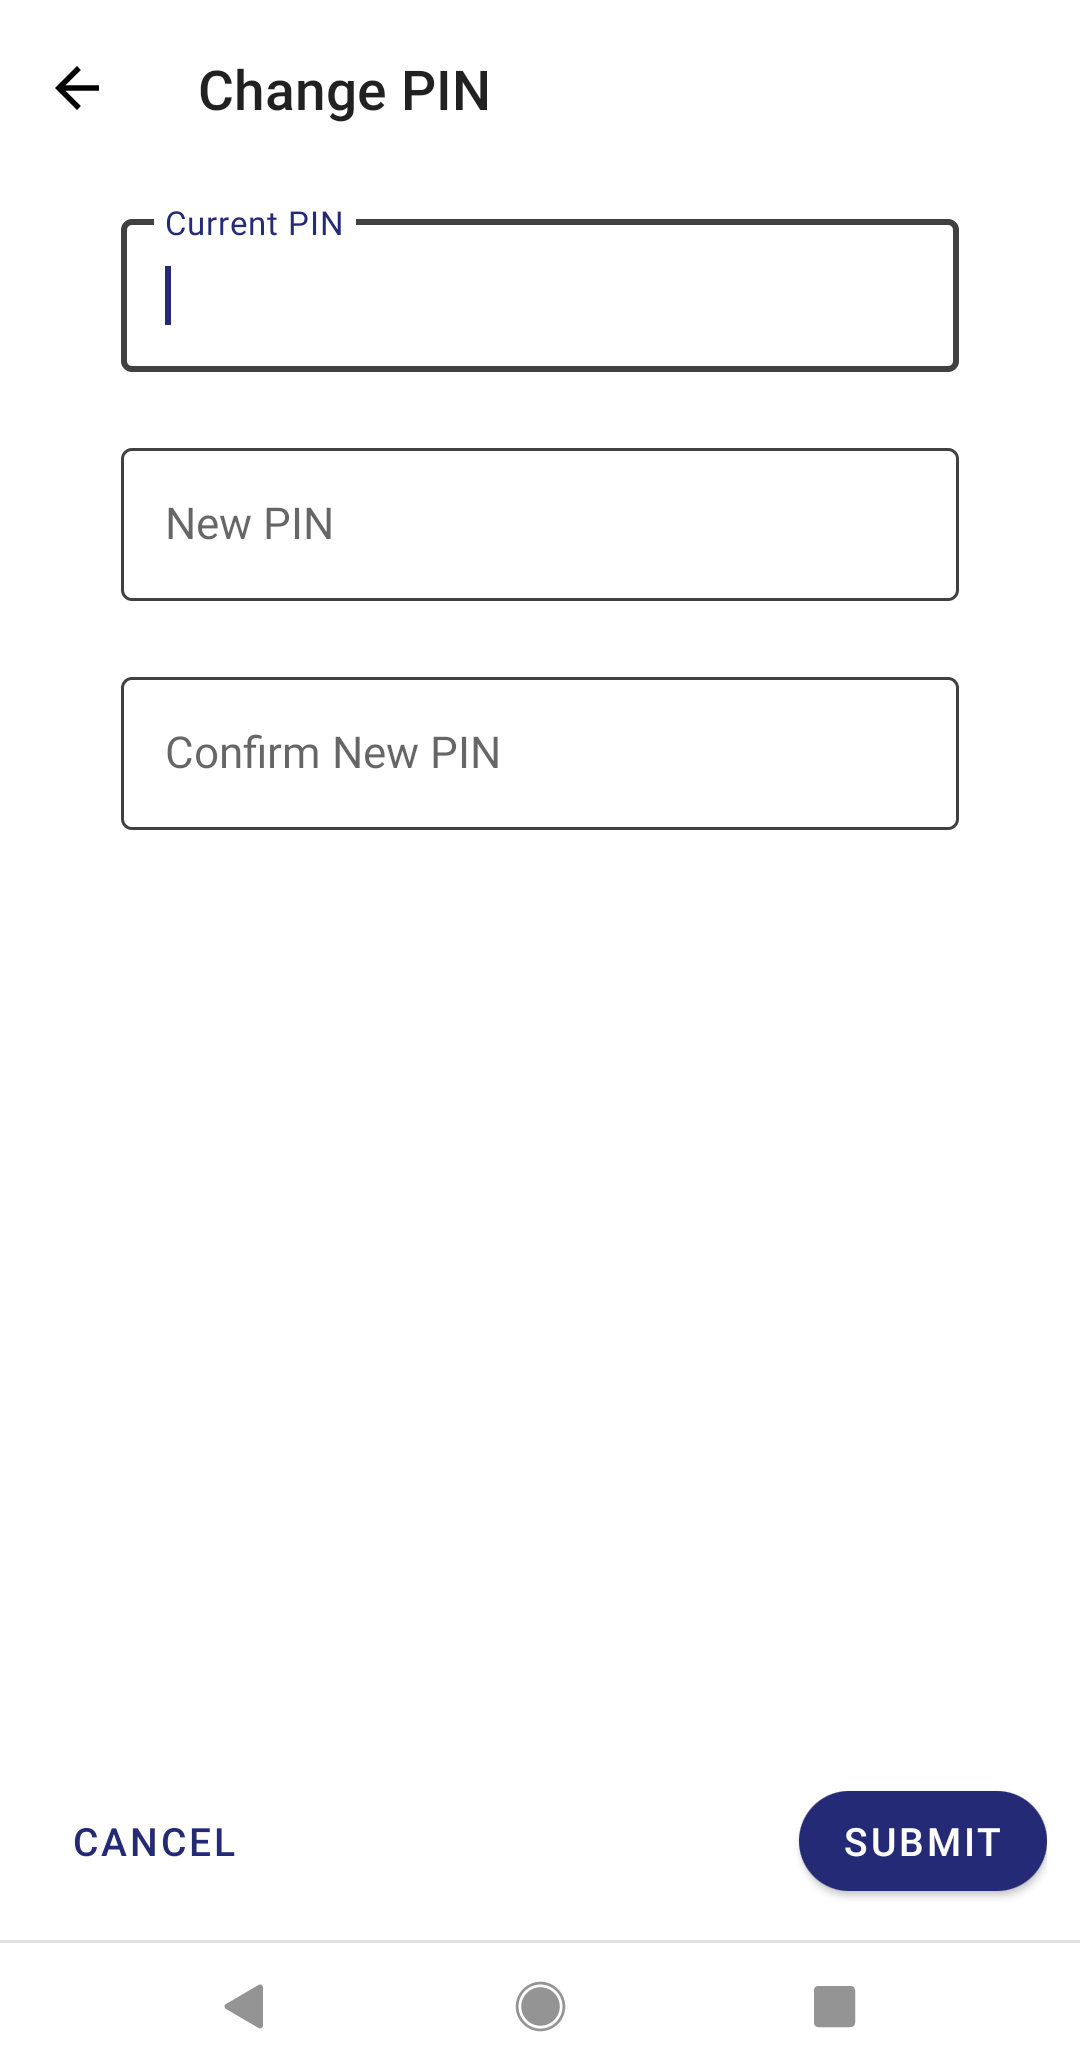 Confirm new PIN